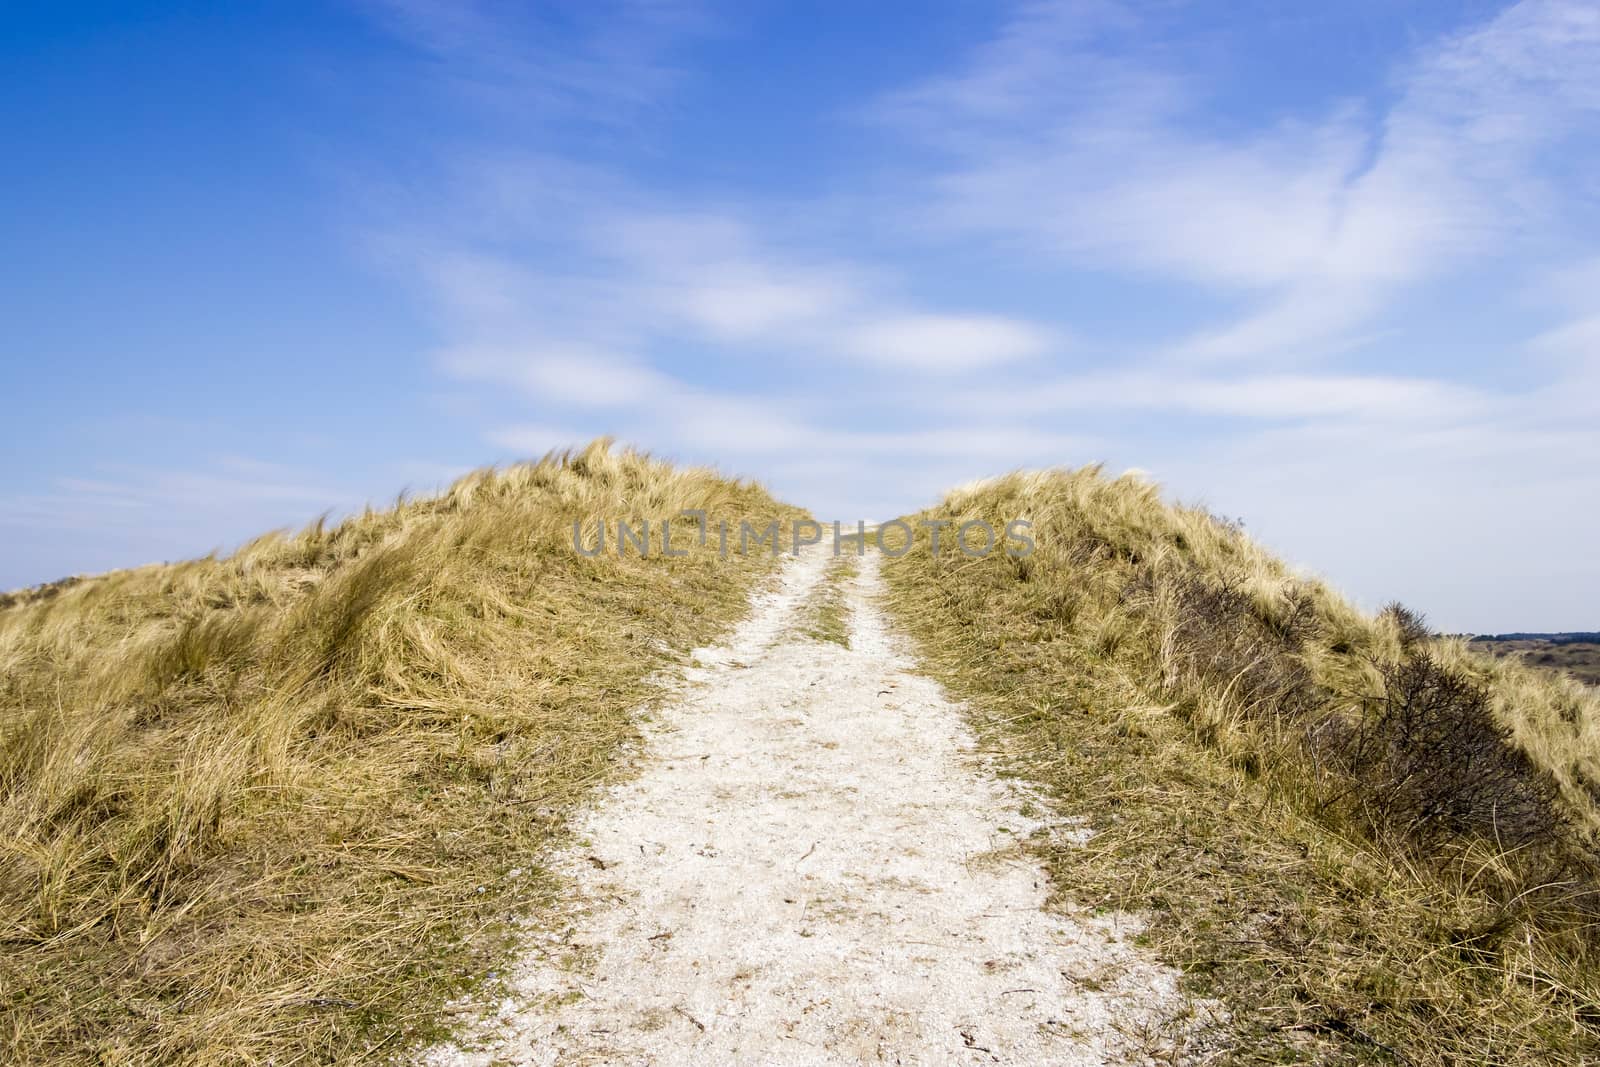 Road in dunes, National Park Zuid Kennemerland, The Netherlands by Tetyana